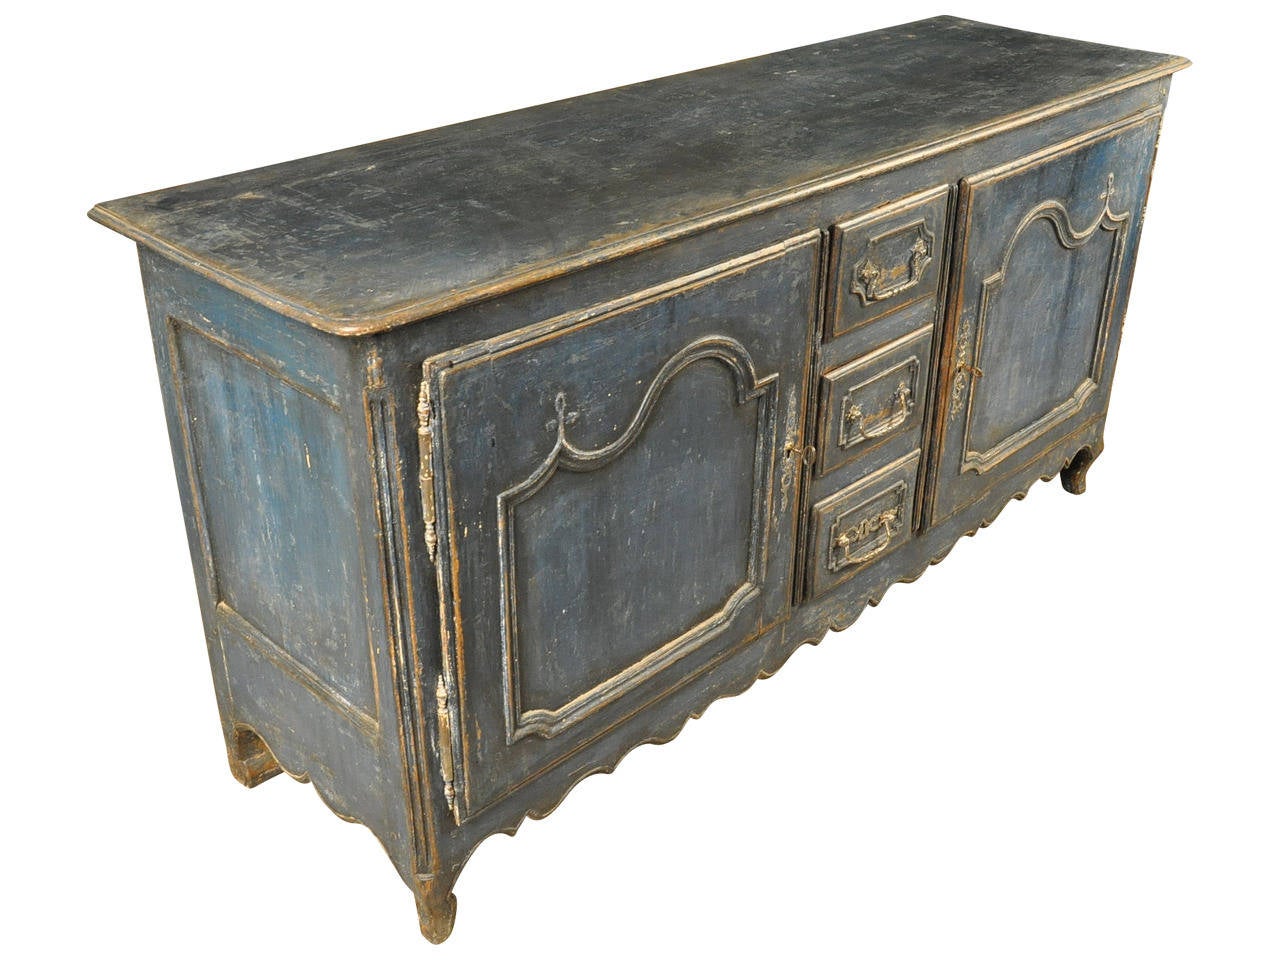 A wonderful 18th century painted Provencal Buffet - enfilade from the South of France, circa 1750.  The painted finish is in rich hues of deep azure blue.